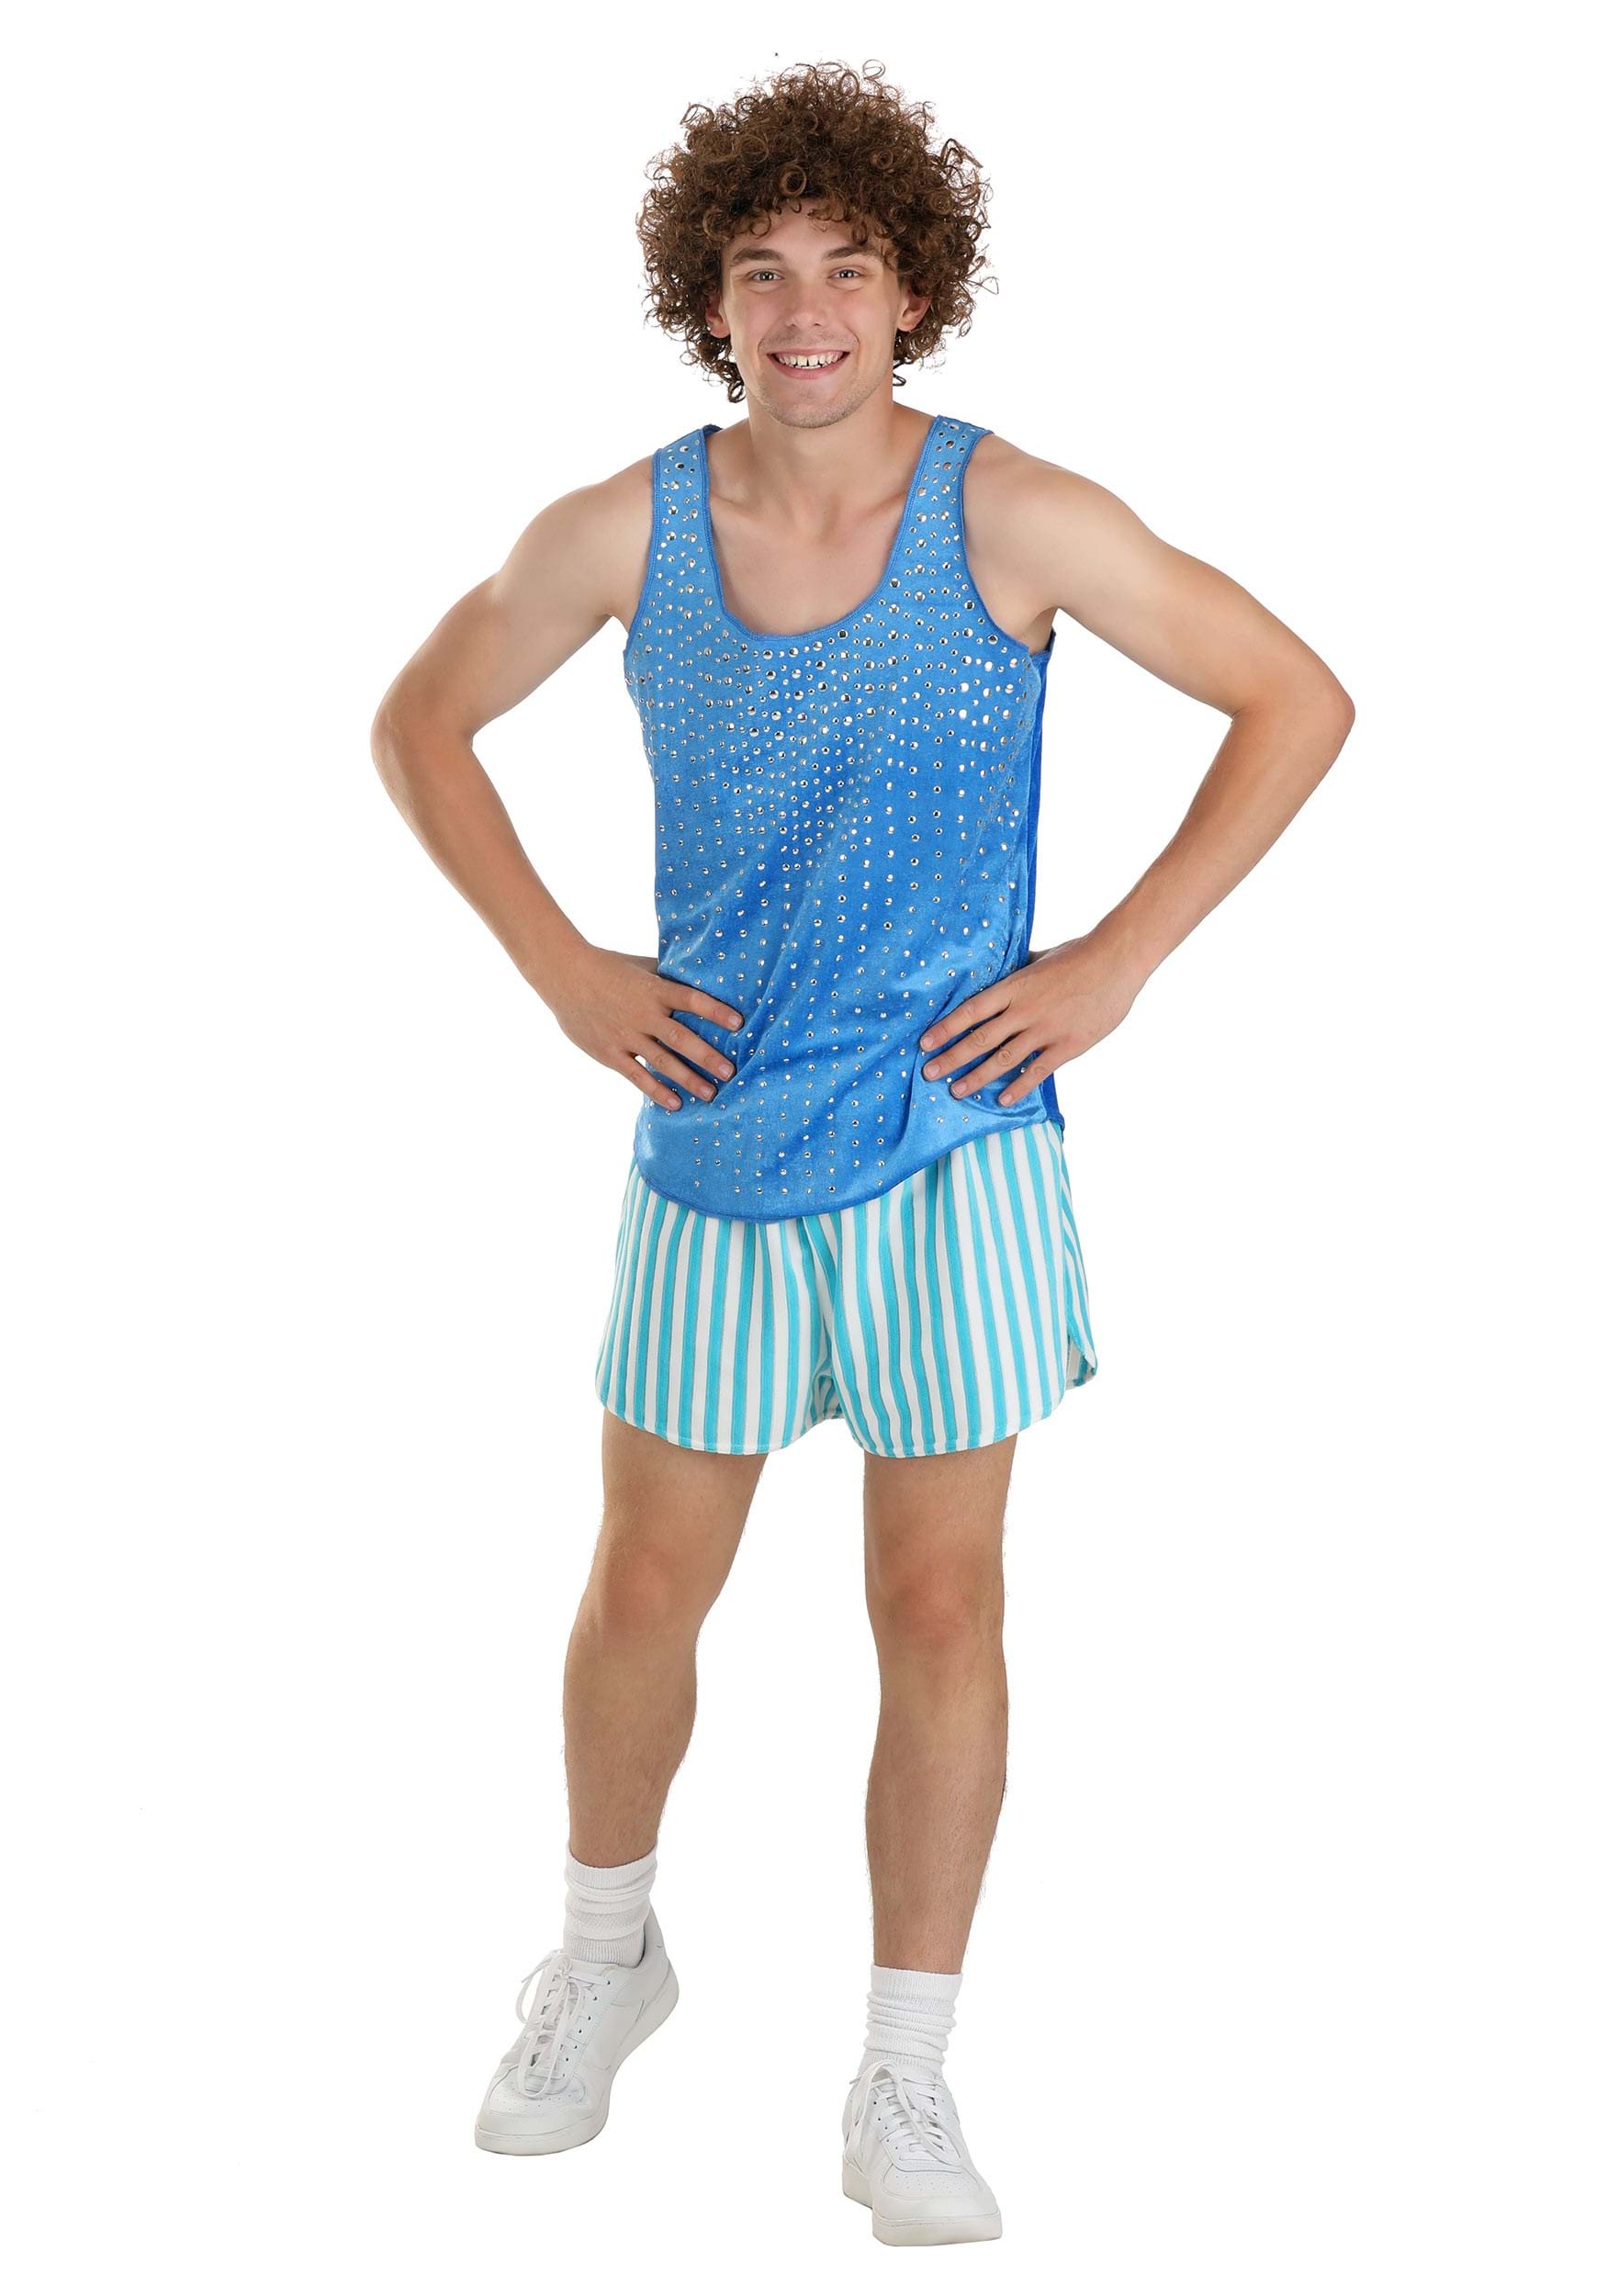 Photos - Fancy Dress Simmons FUN Costumes Blue Richard  Costume for Men | Fitness Costume As Sho 